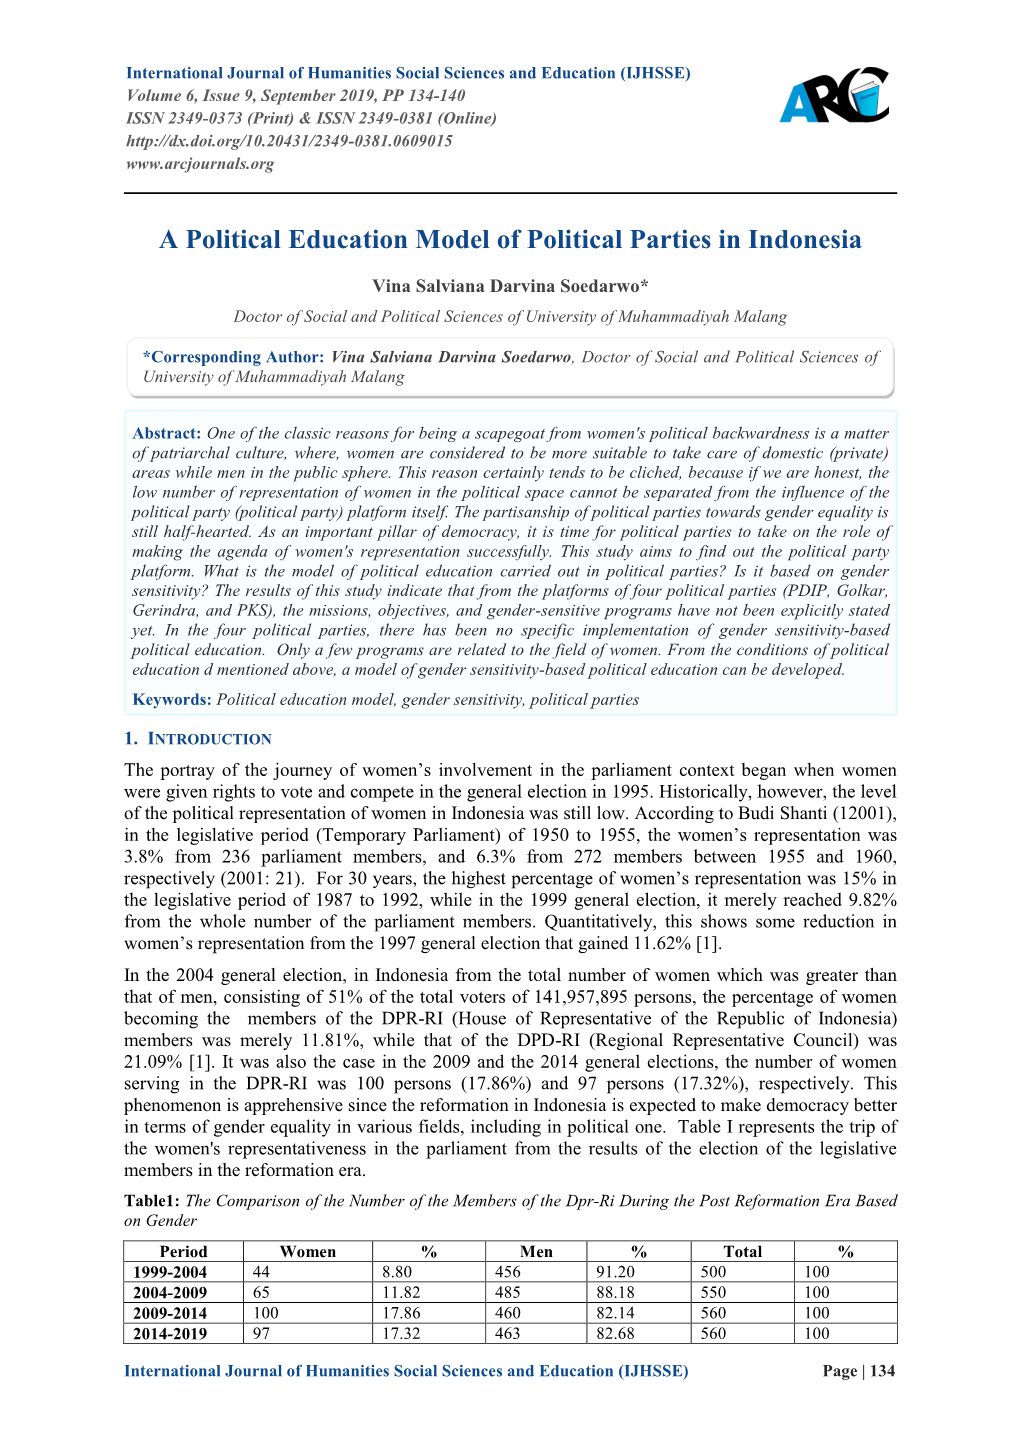 A Political Education Model of Political Parties in Indonesia